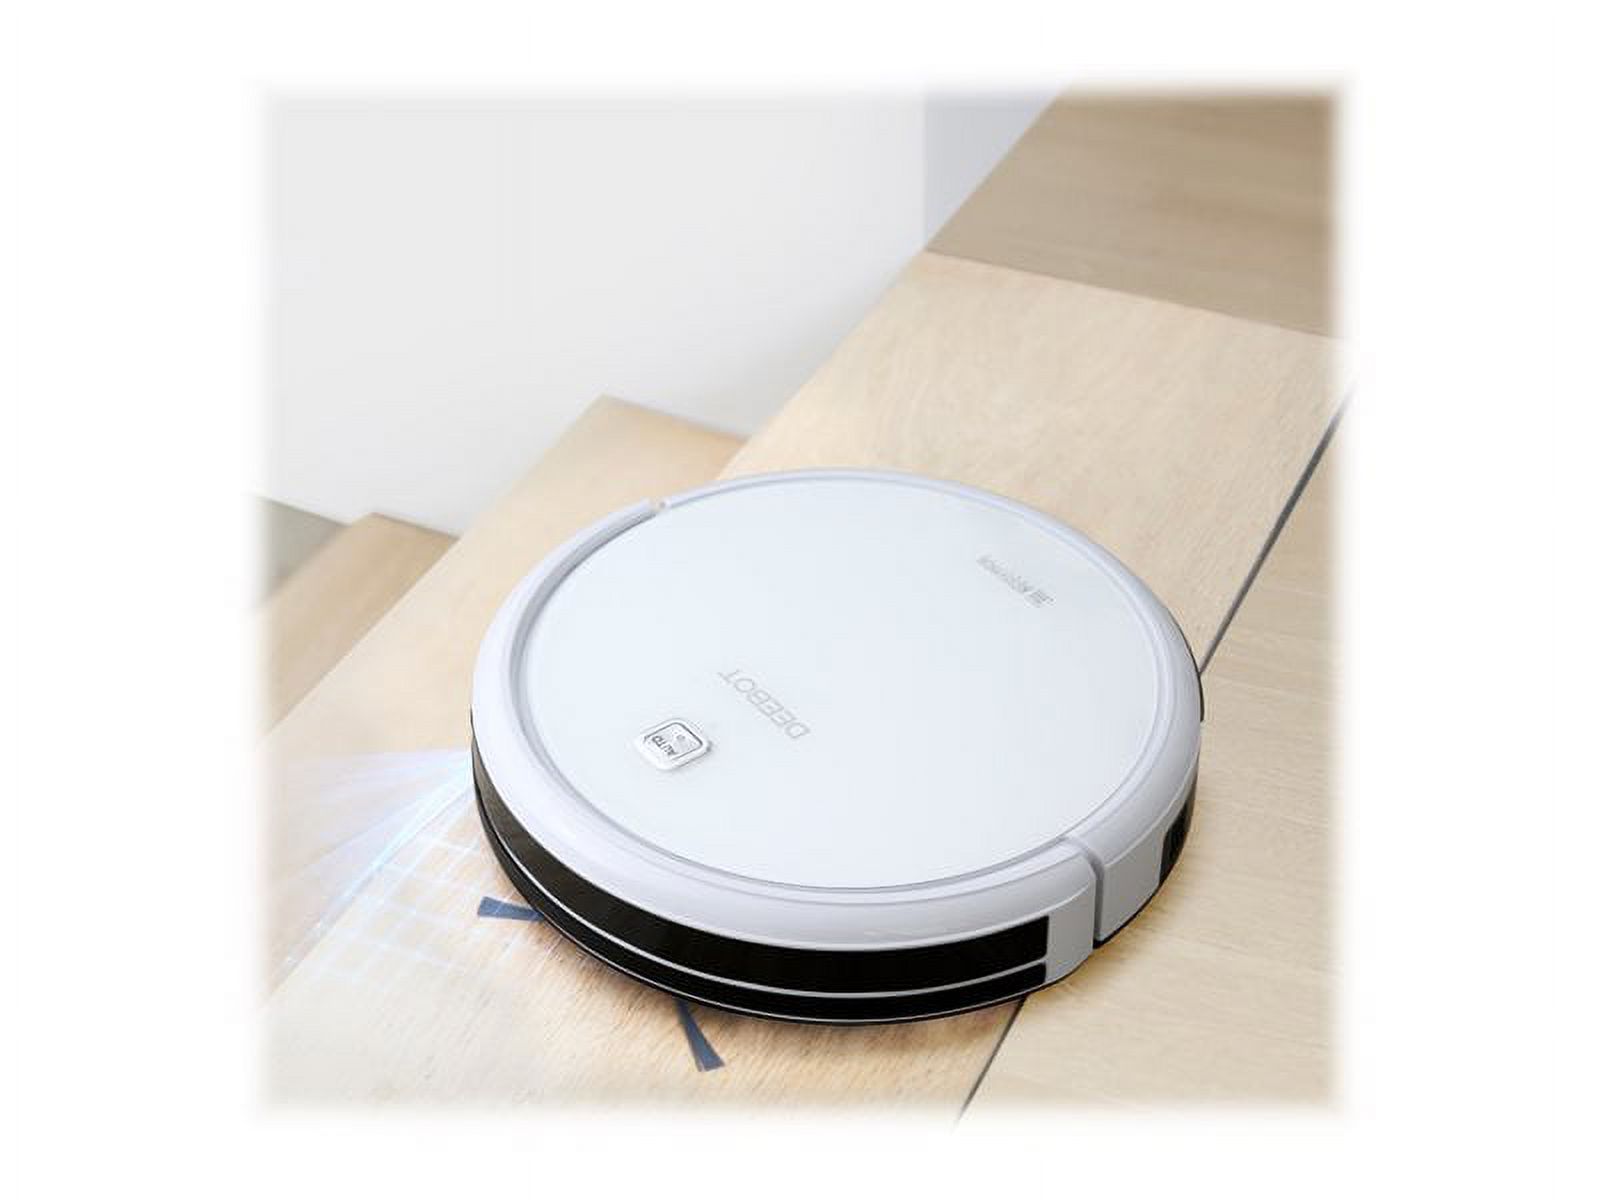 Ecovacs Deebot N79W Remote Control Home Robot Multi Surface Vacuum Cleaner - image 4 of 8